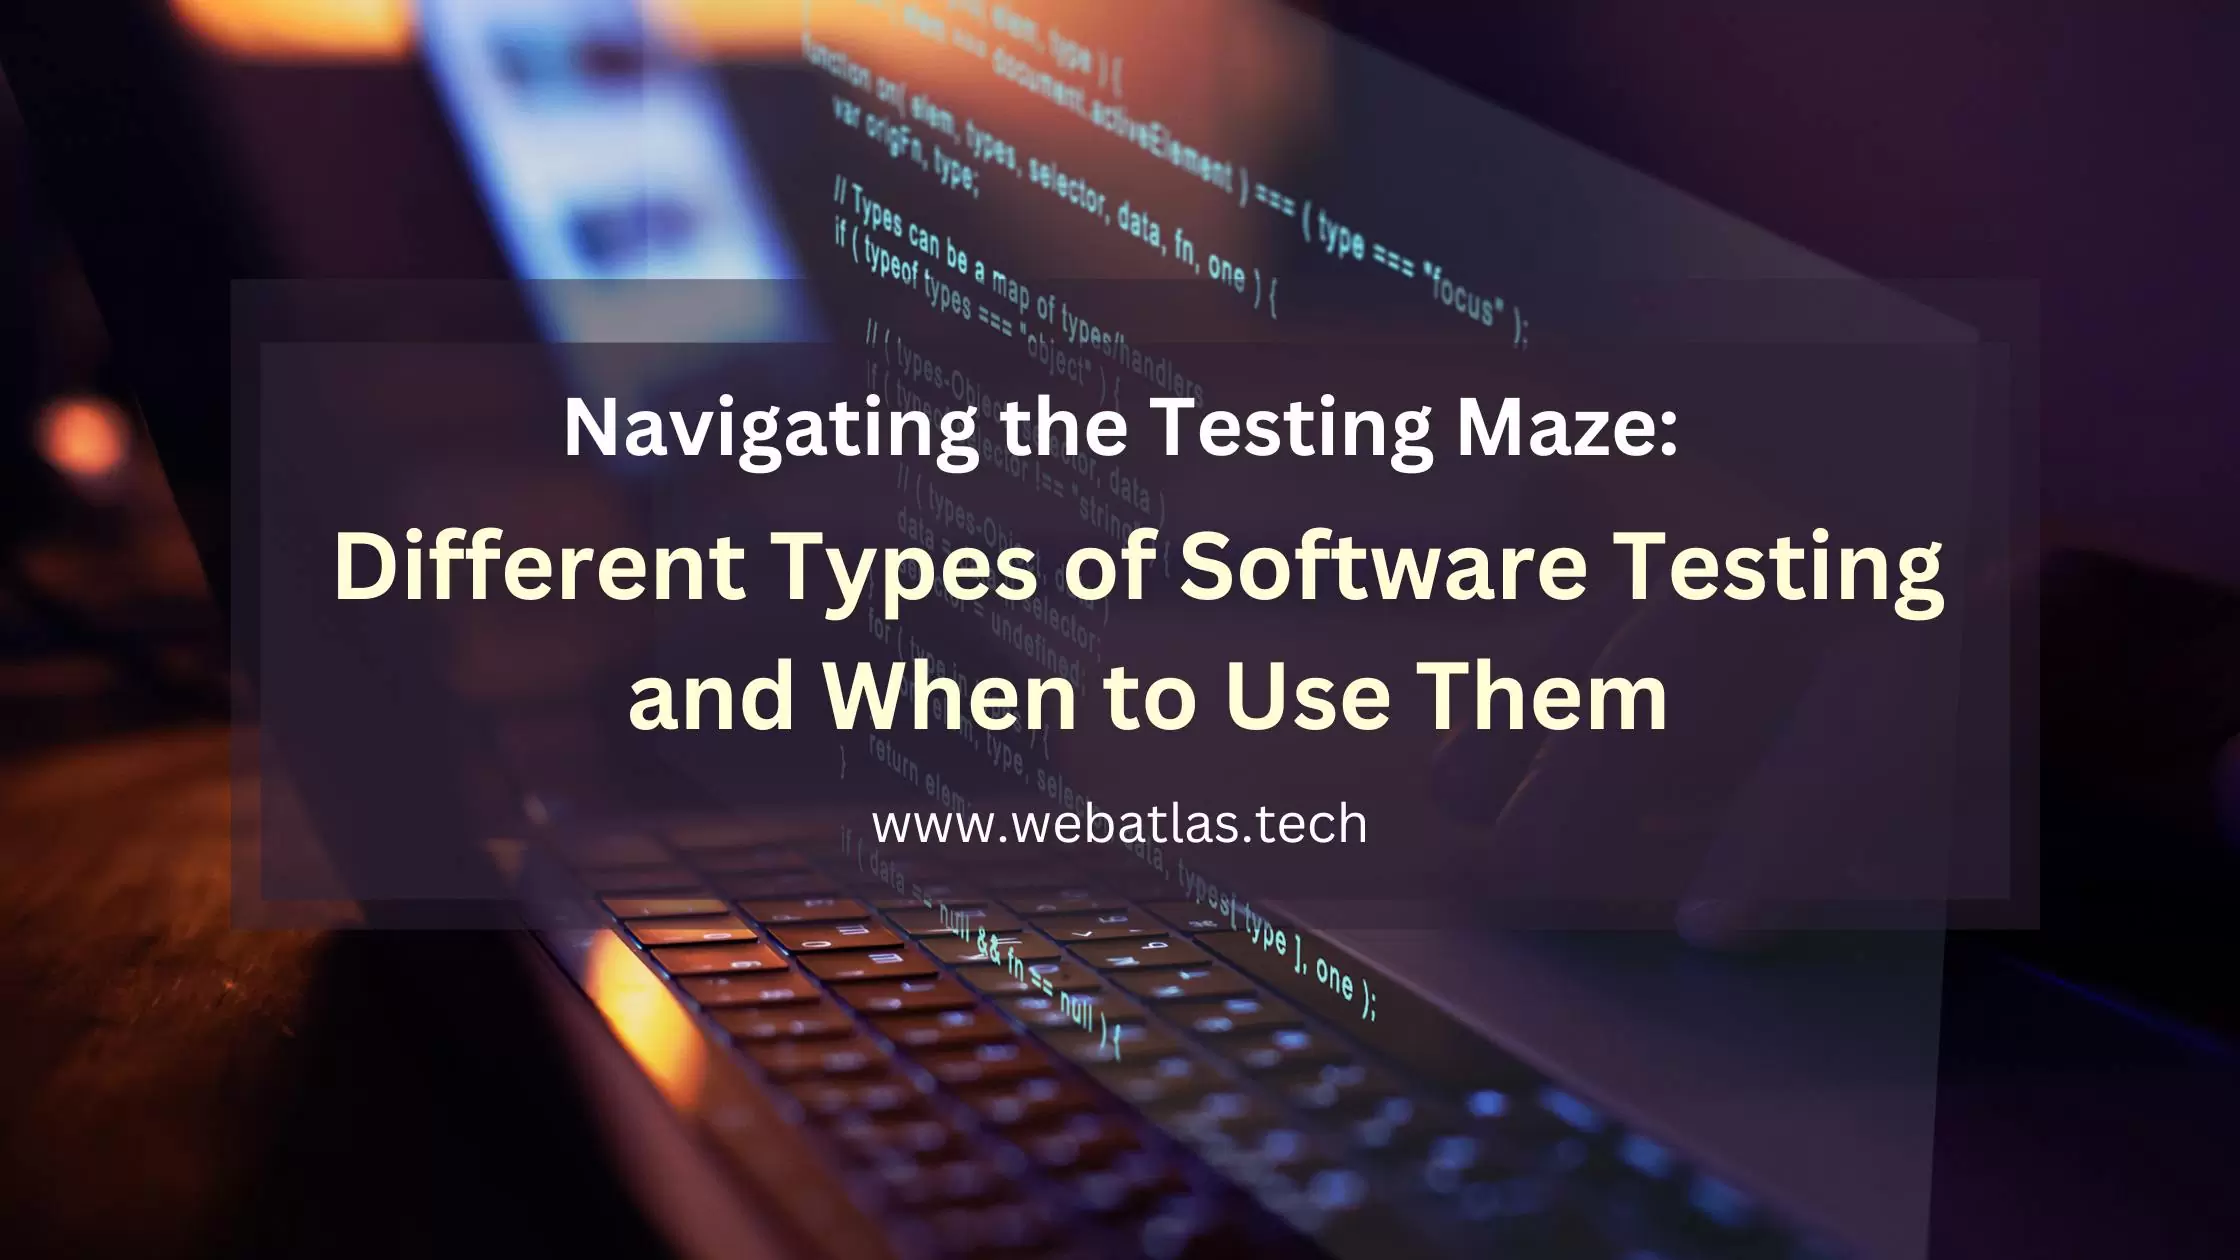 Different Types of Software Testing and When to Use Them